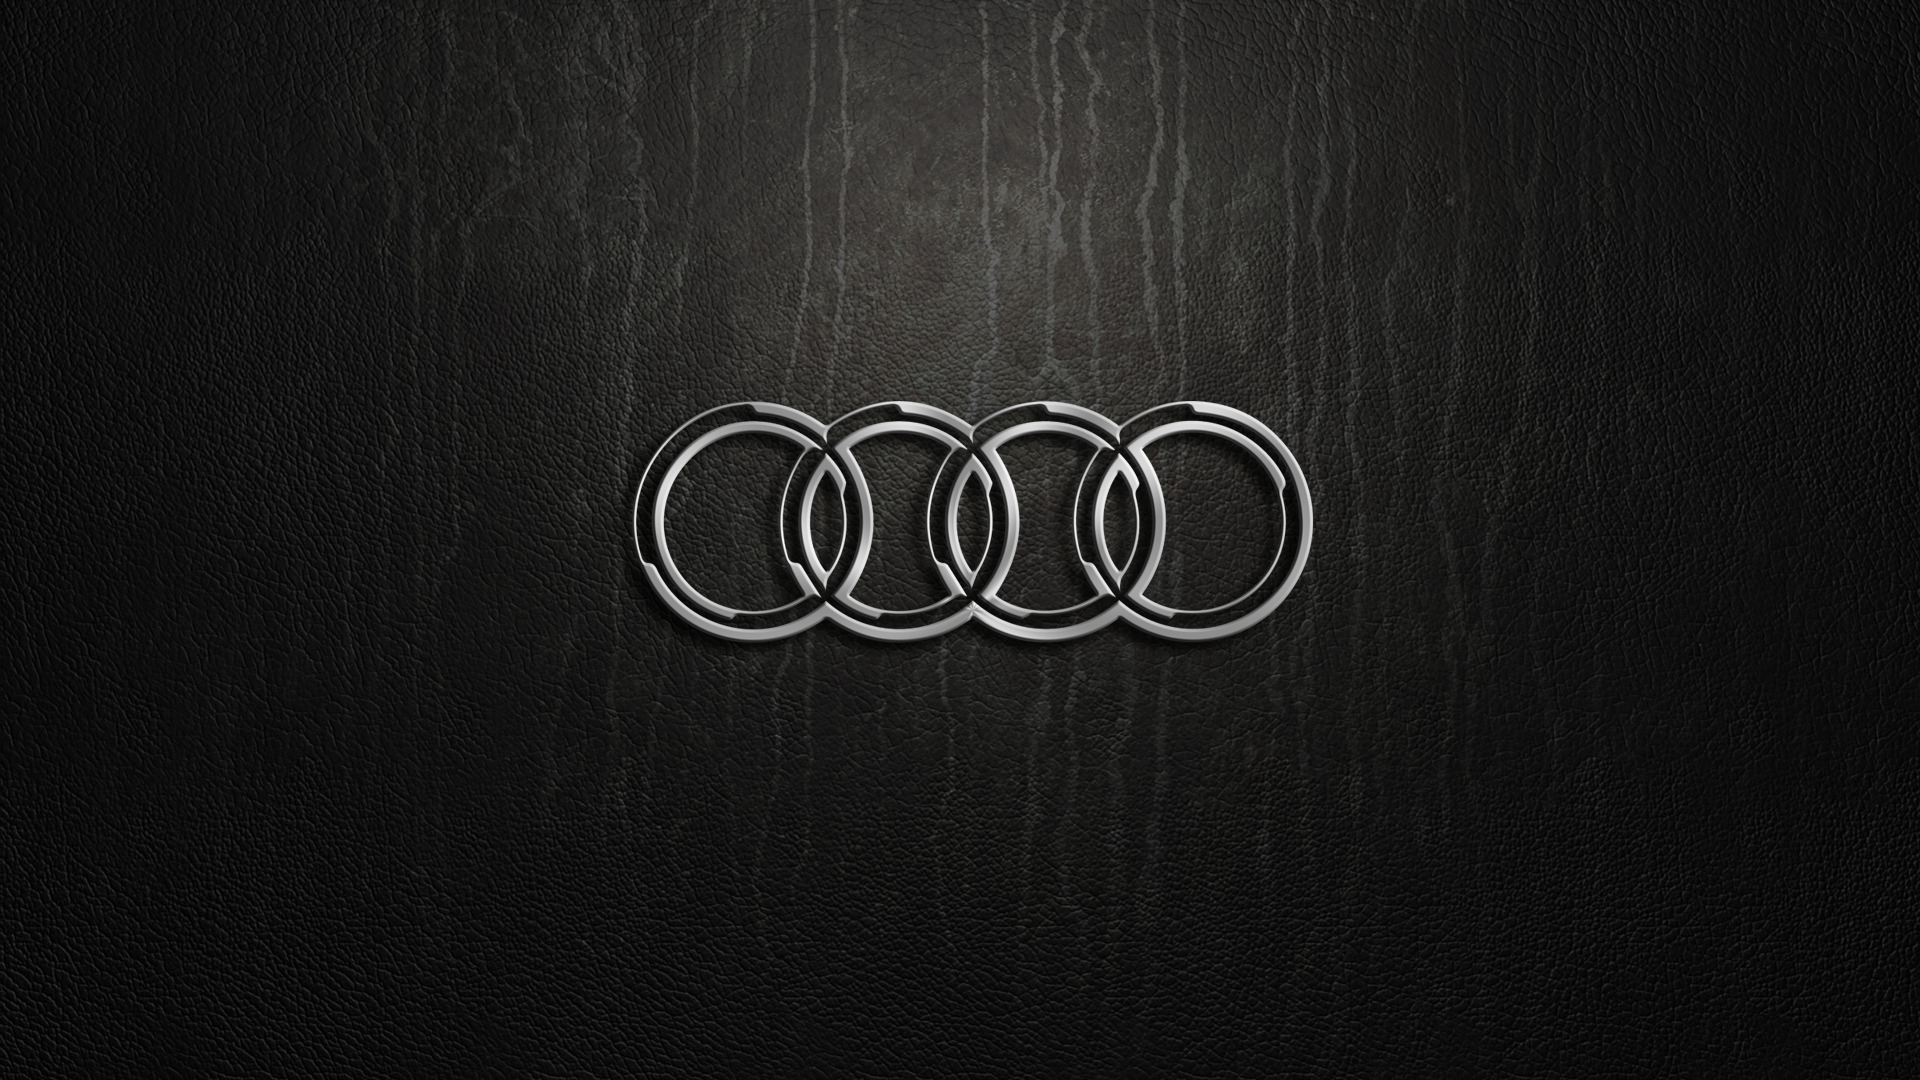 Audi HD Wallpaper and Background